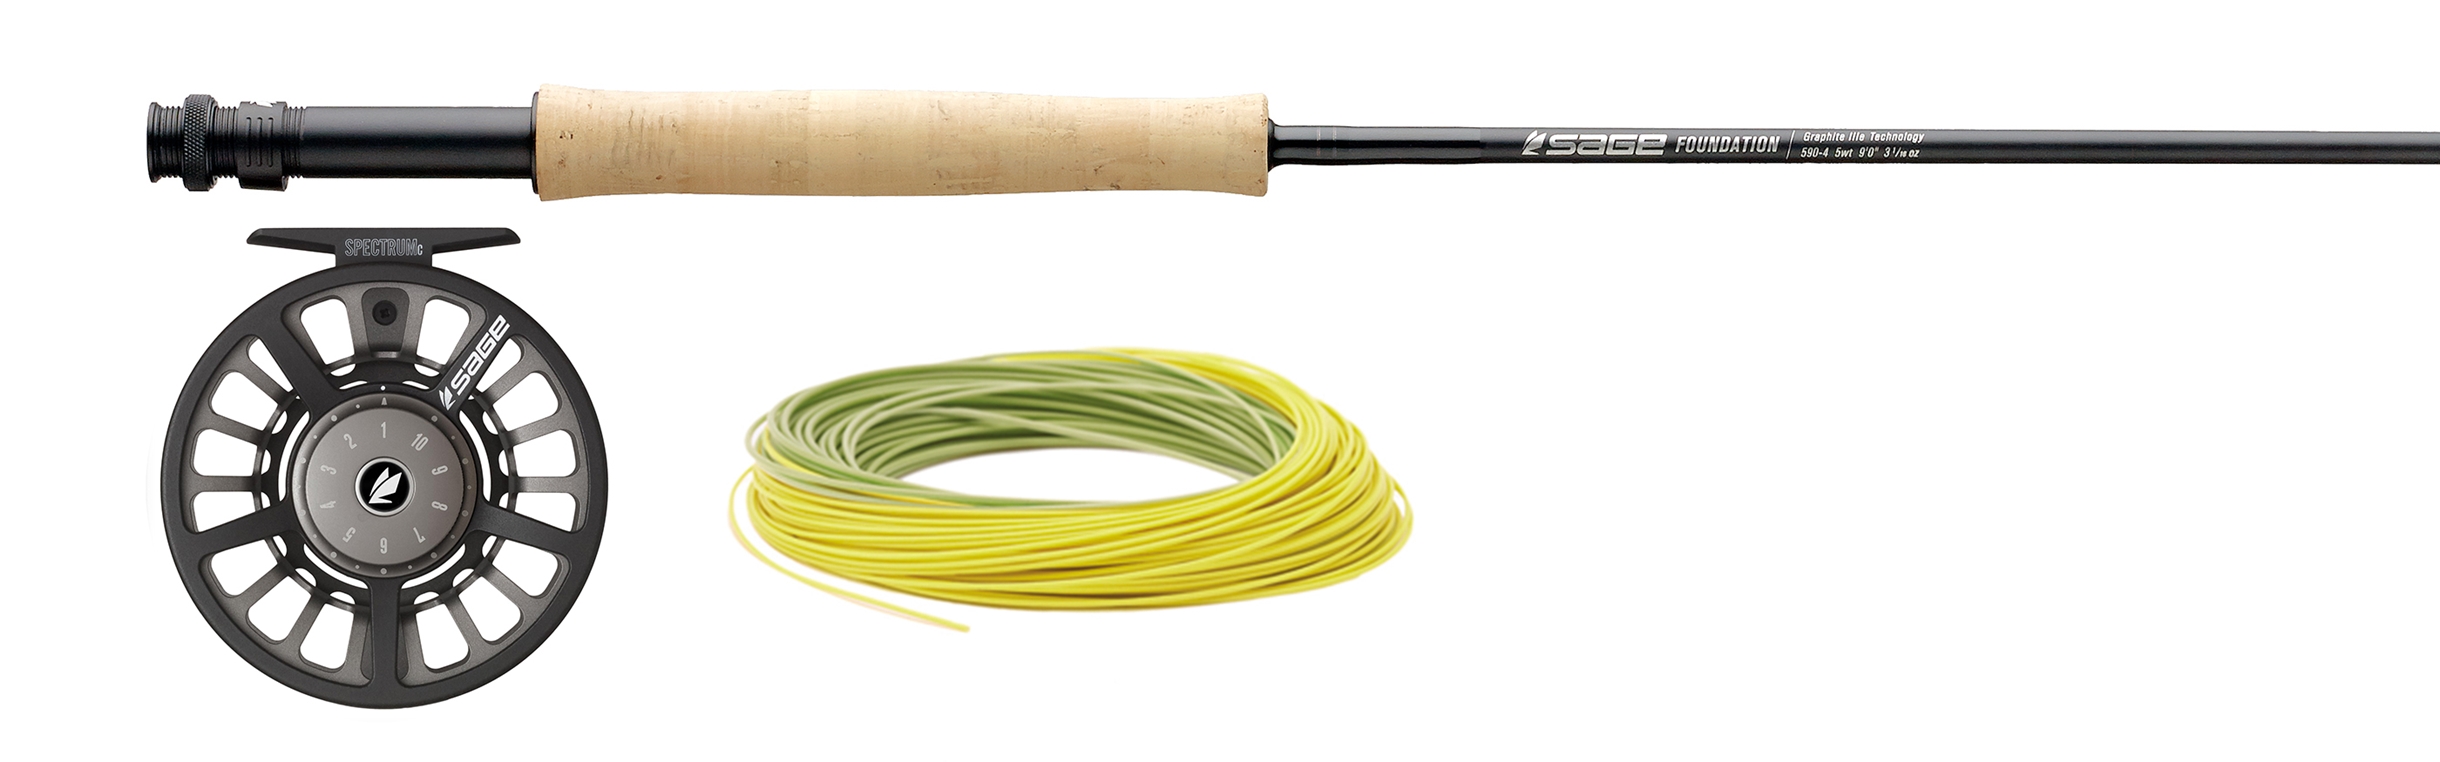 You'll be hookin' trout in no time with these fly fishing essentials -  FREESKIER